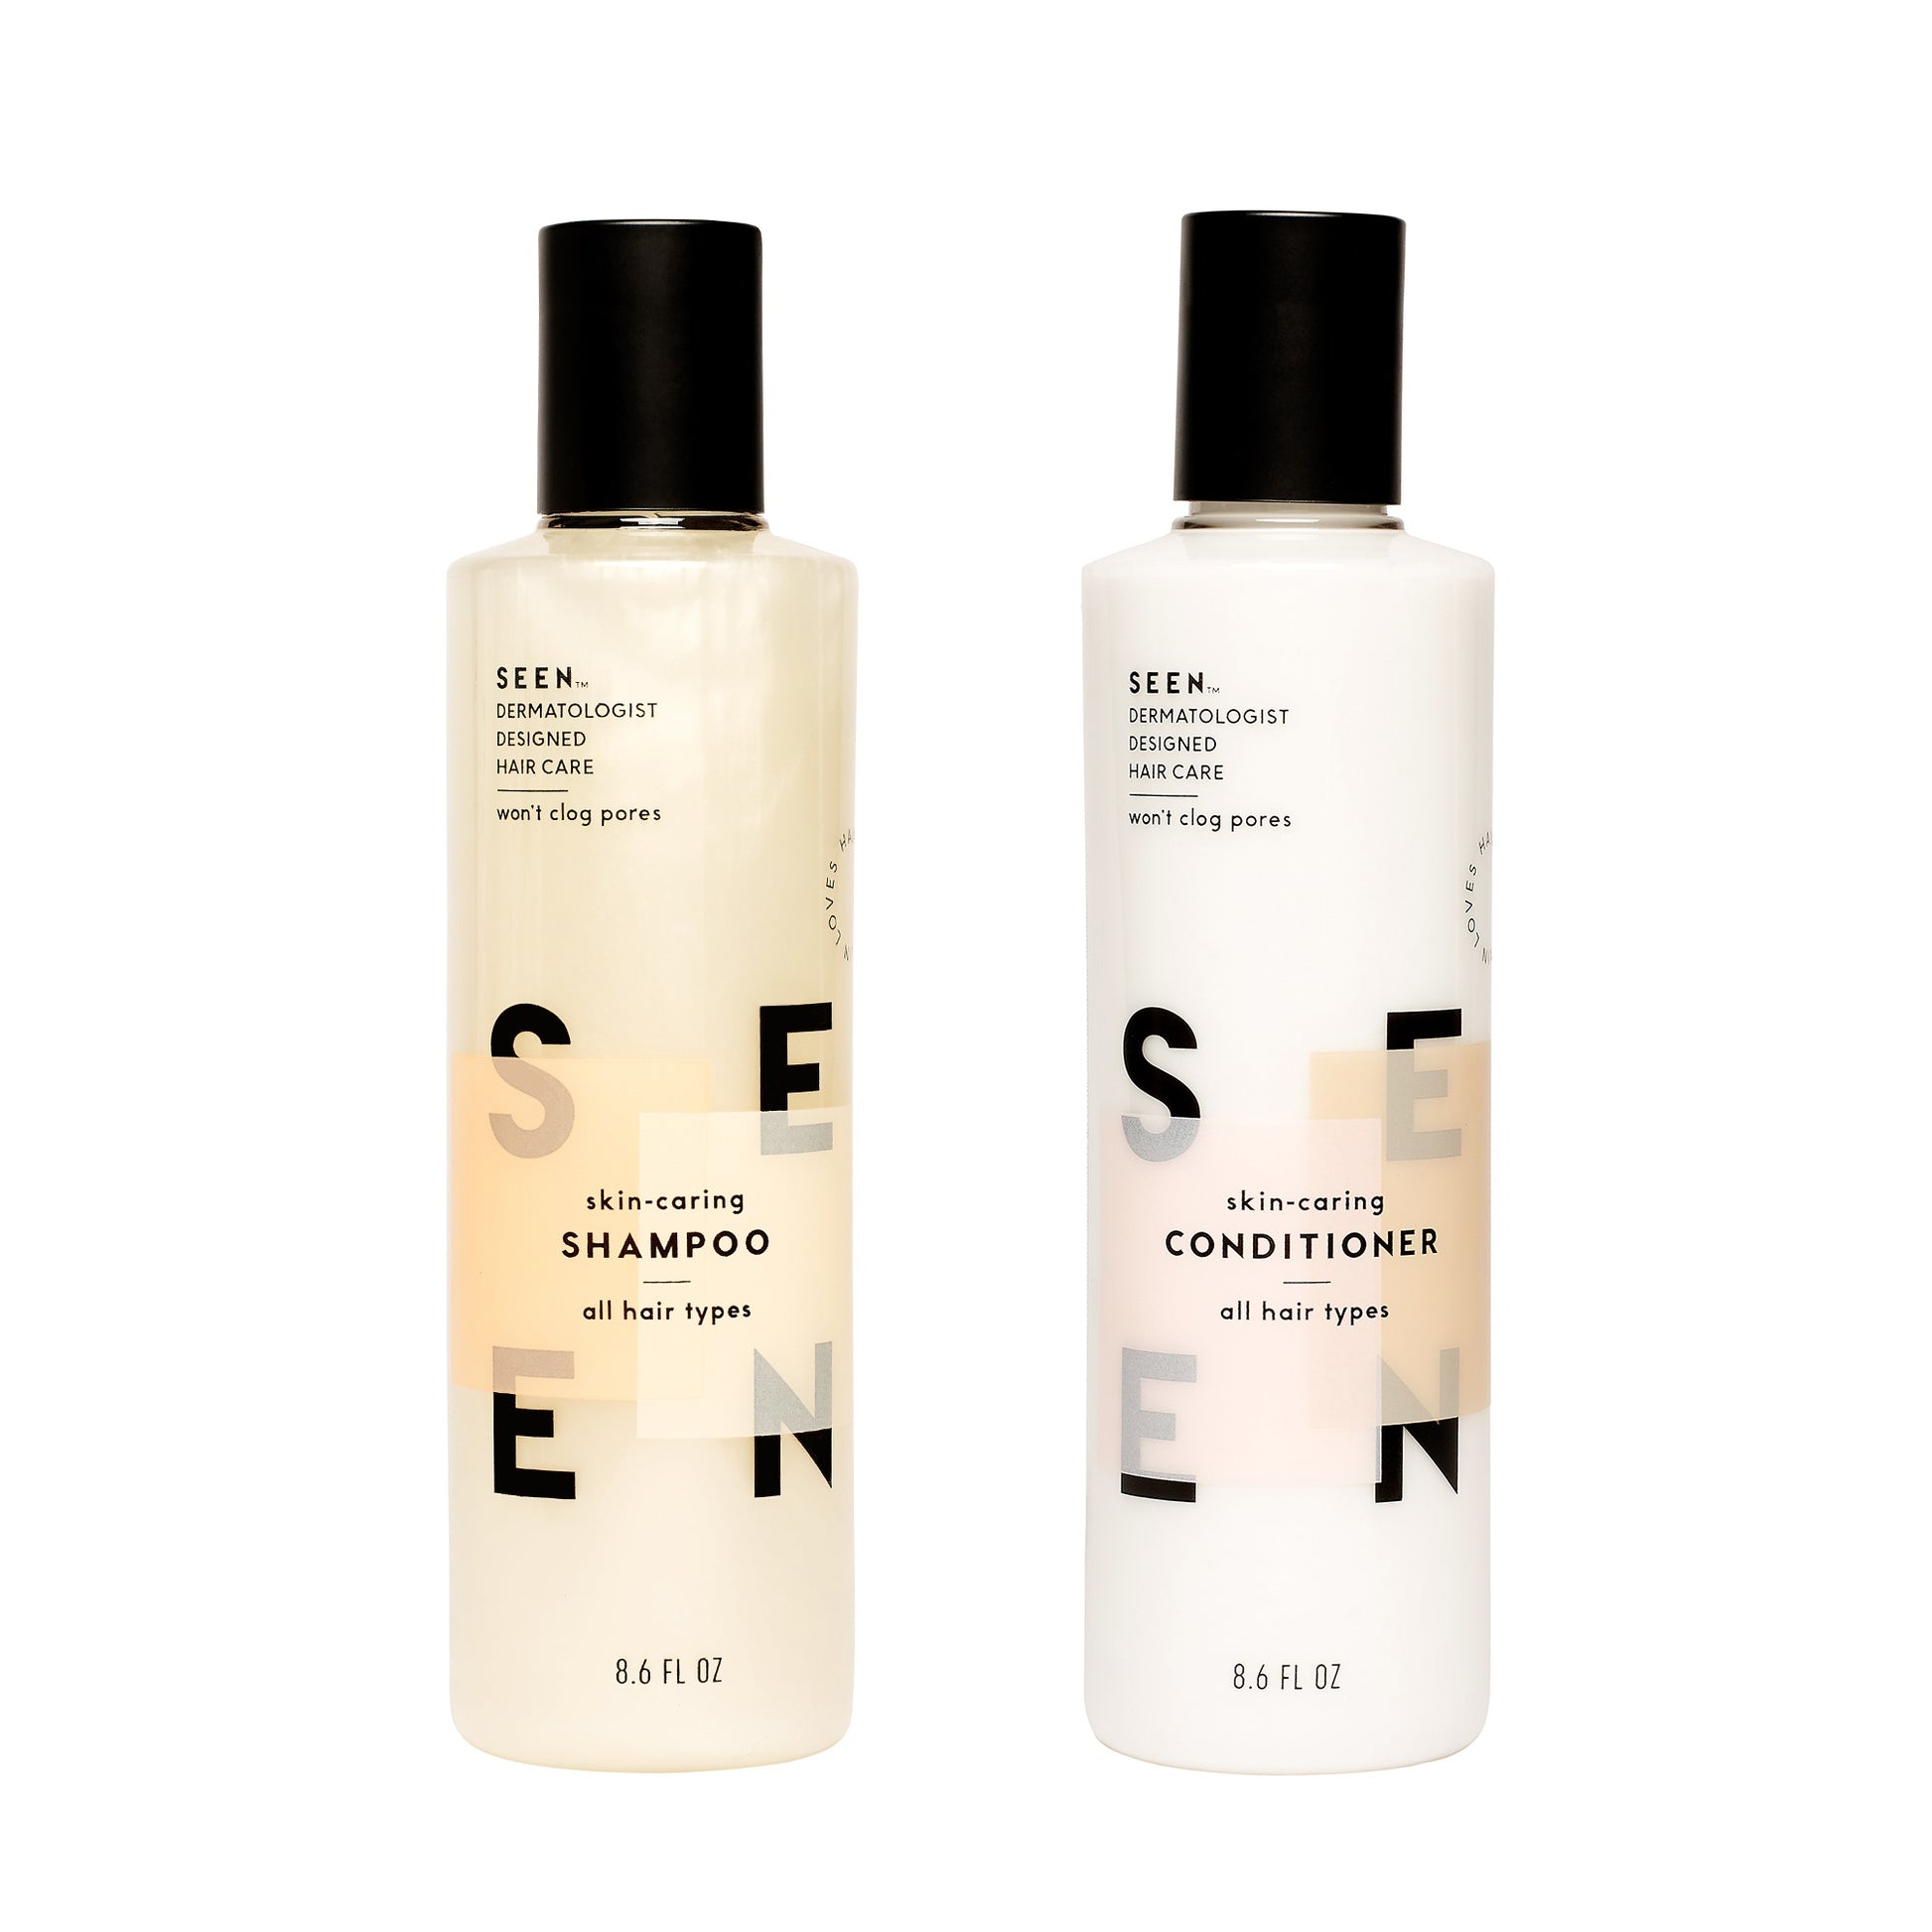 3 Best of Beauty-Winning Shampoo & Conditioner Duos That